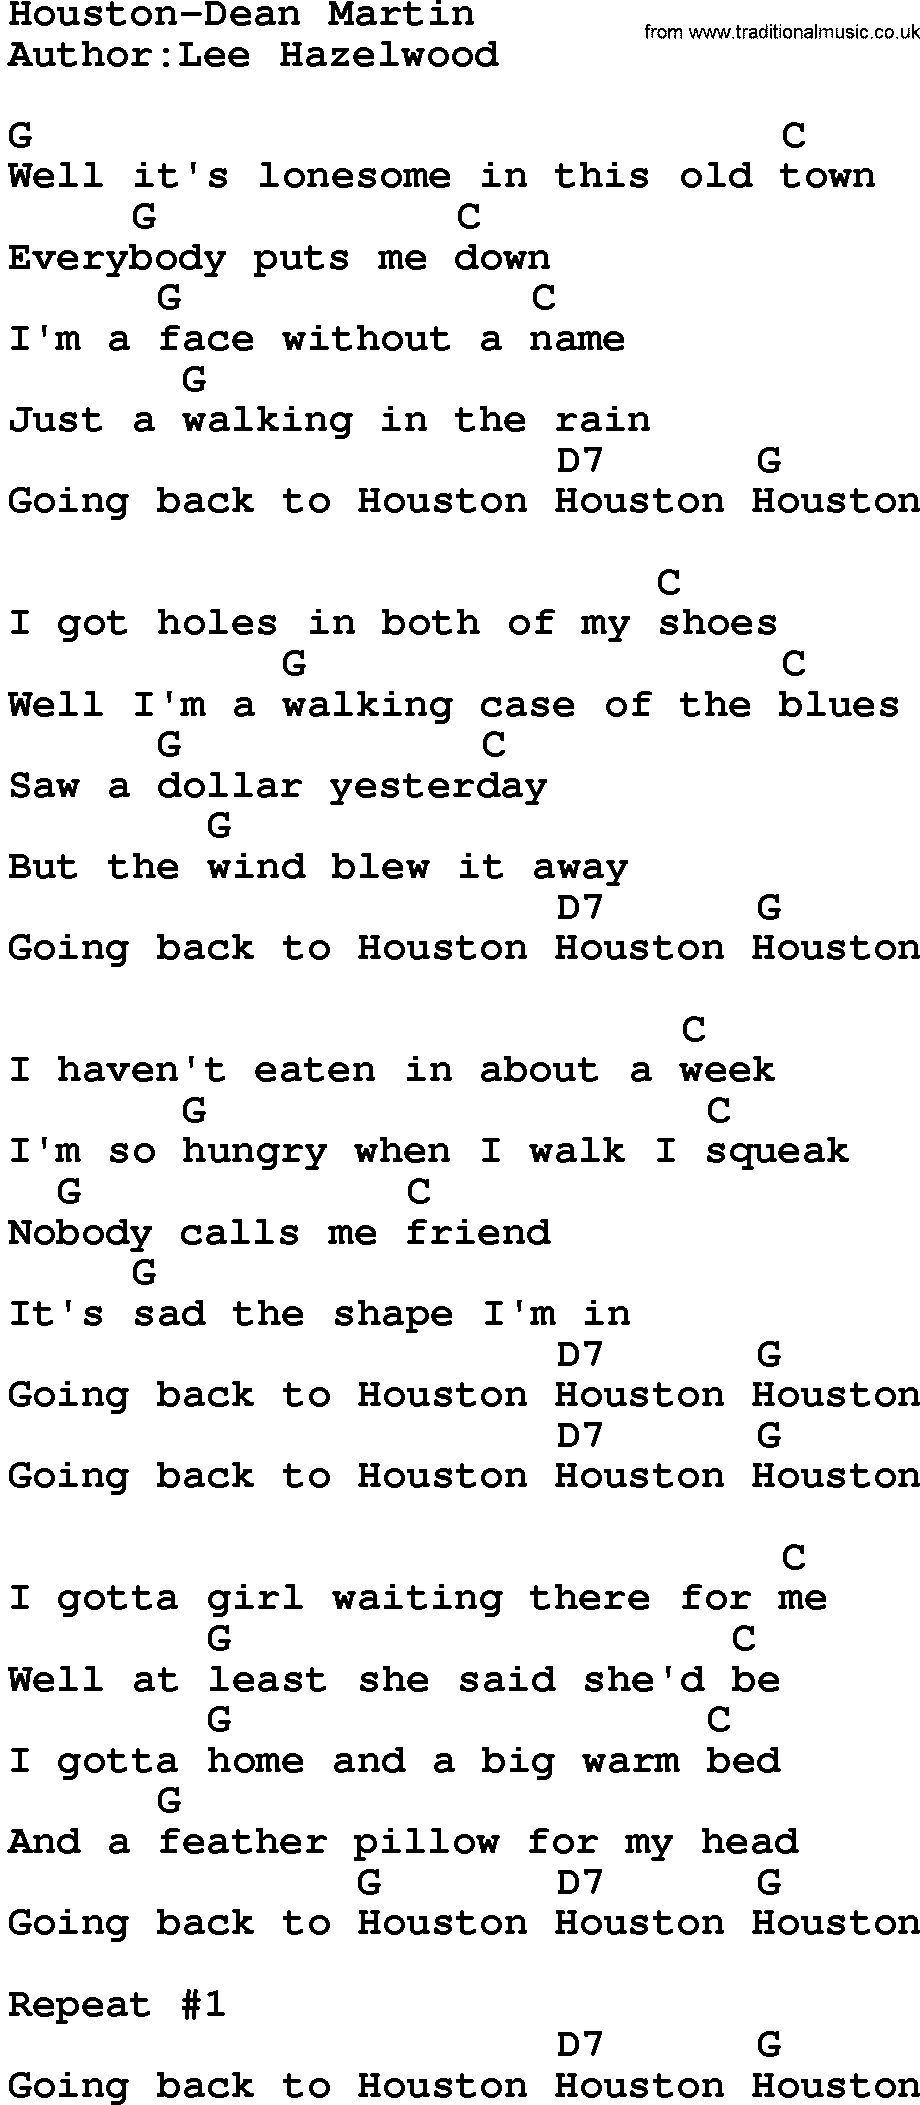 Country music song: Houston-Dean Martin lyrics and chords